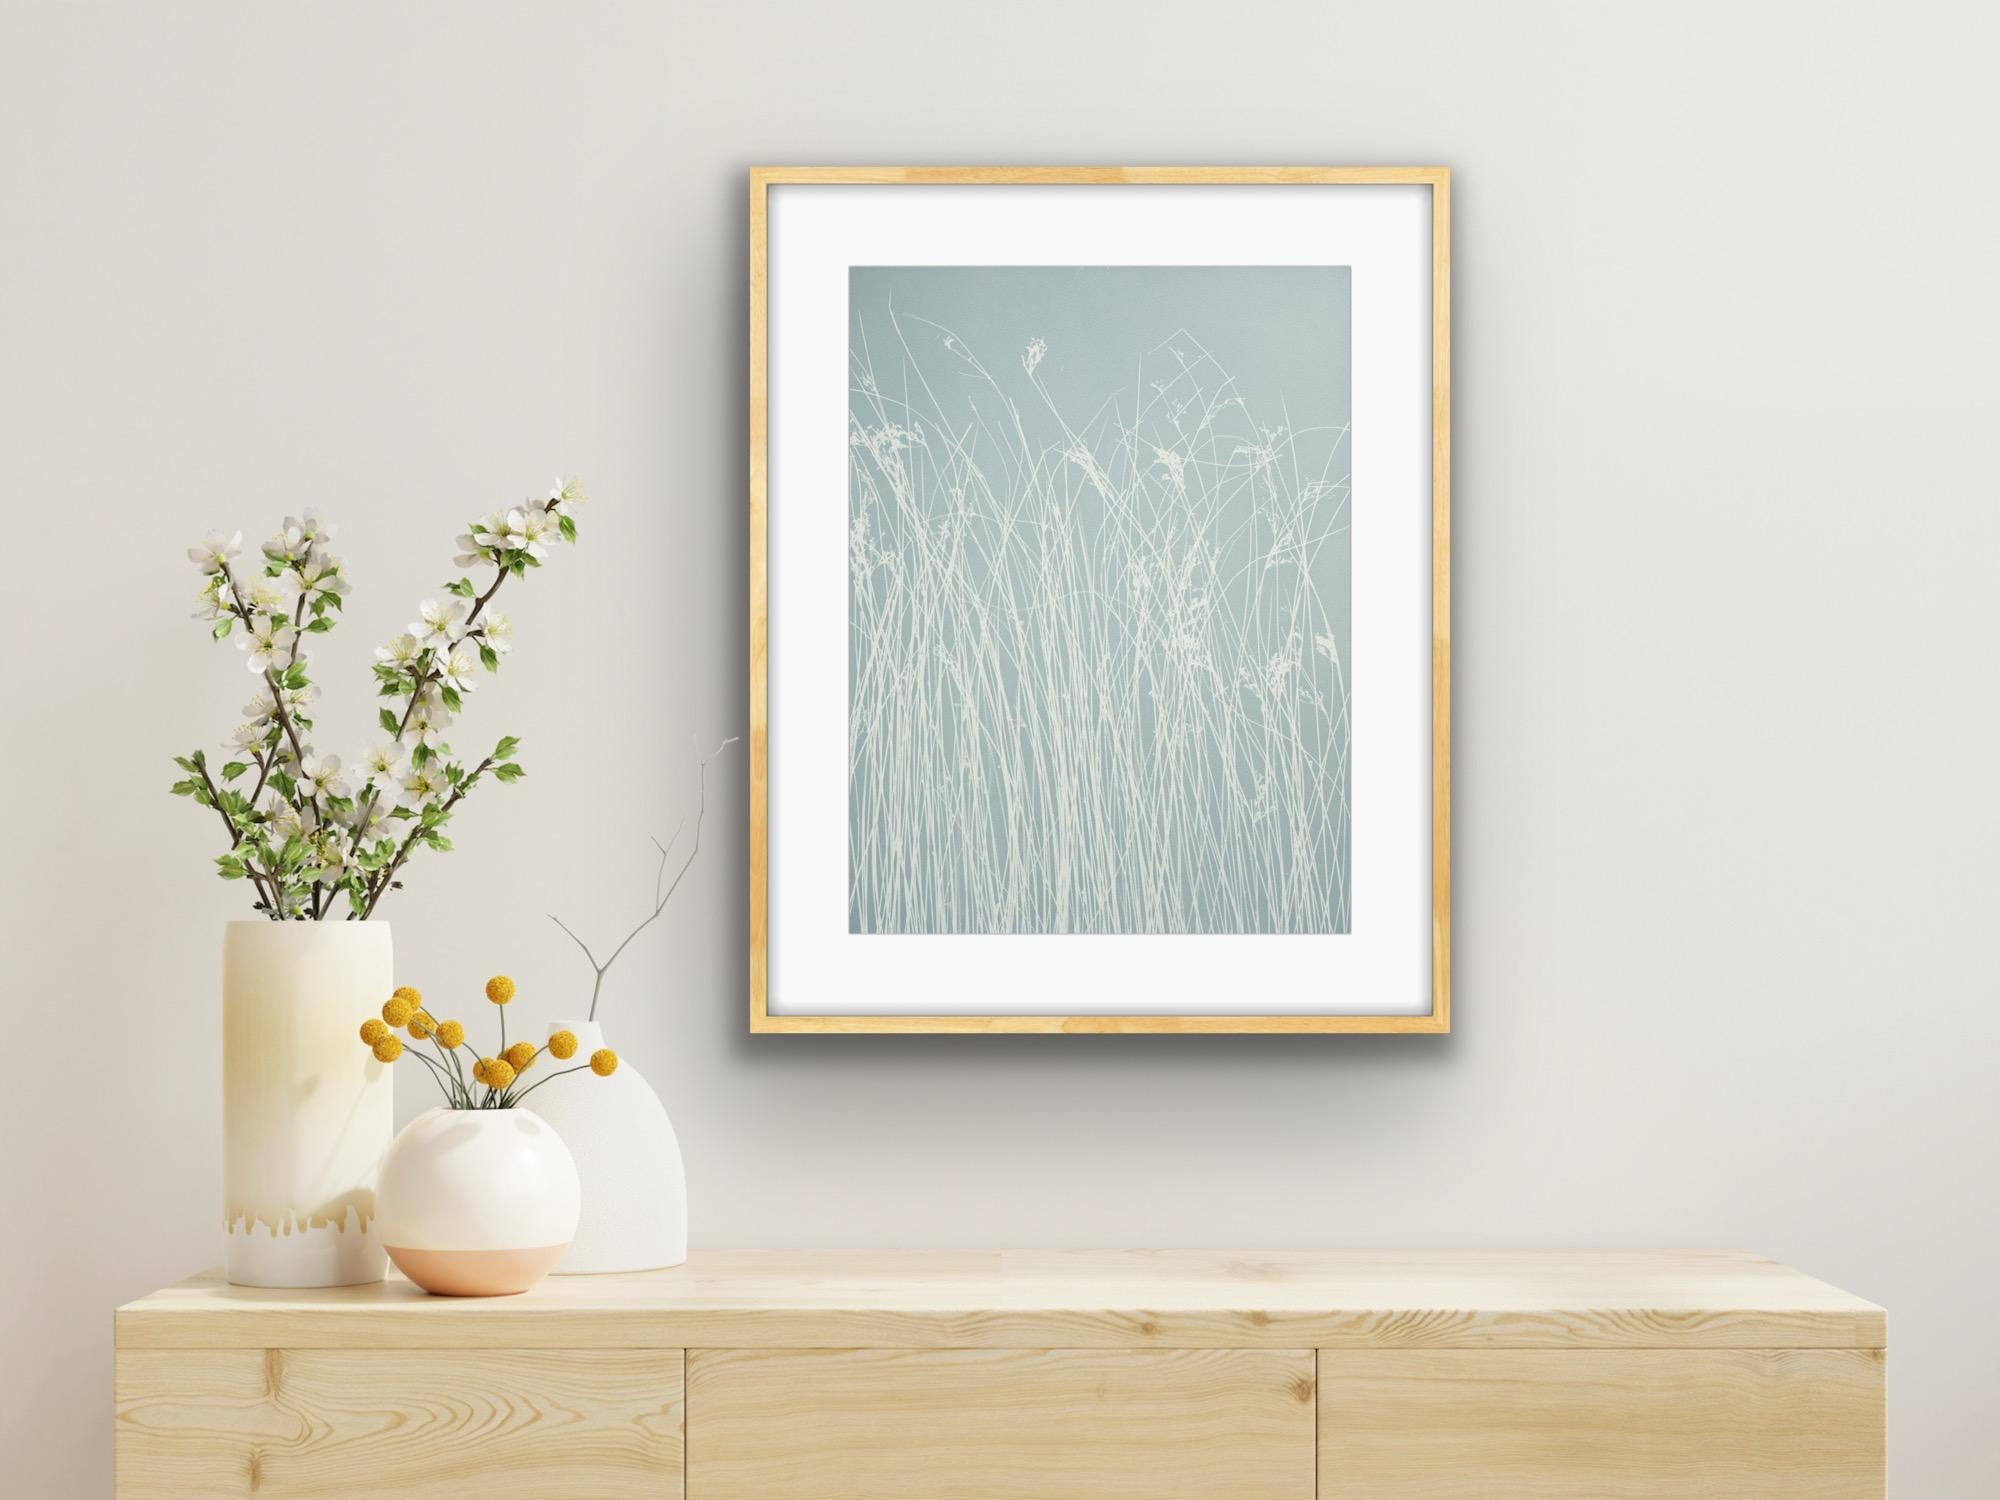 Cloudy Day Marsh Grass II (hand-printed botanical cyanotype, 24 x 18 inches) - Photograph by Christine So